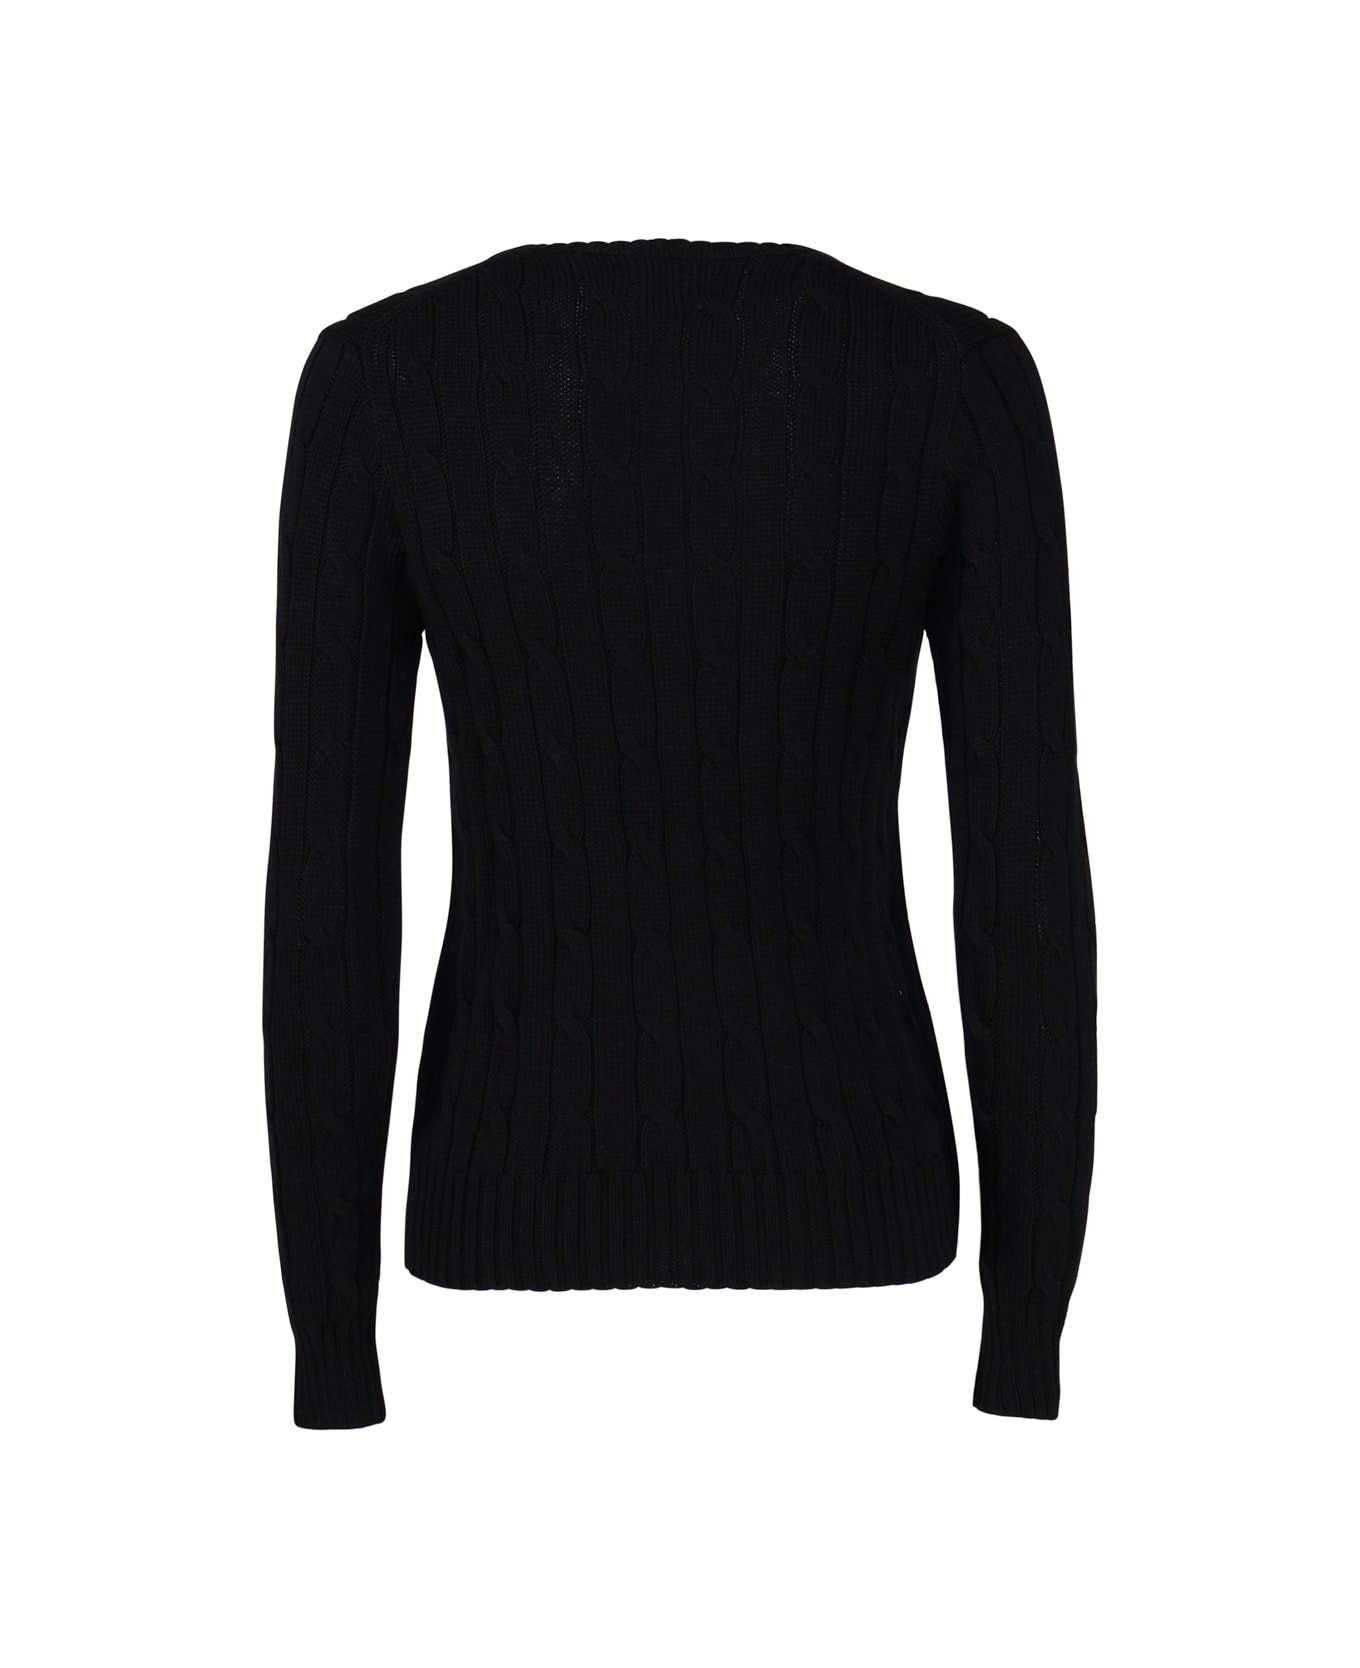 Polo Ralph Lauren Cable Knit Sweater With V-neck - Black